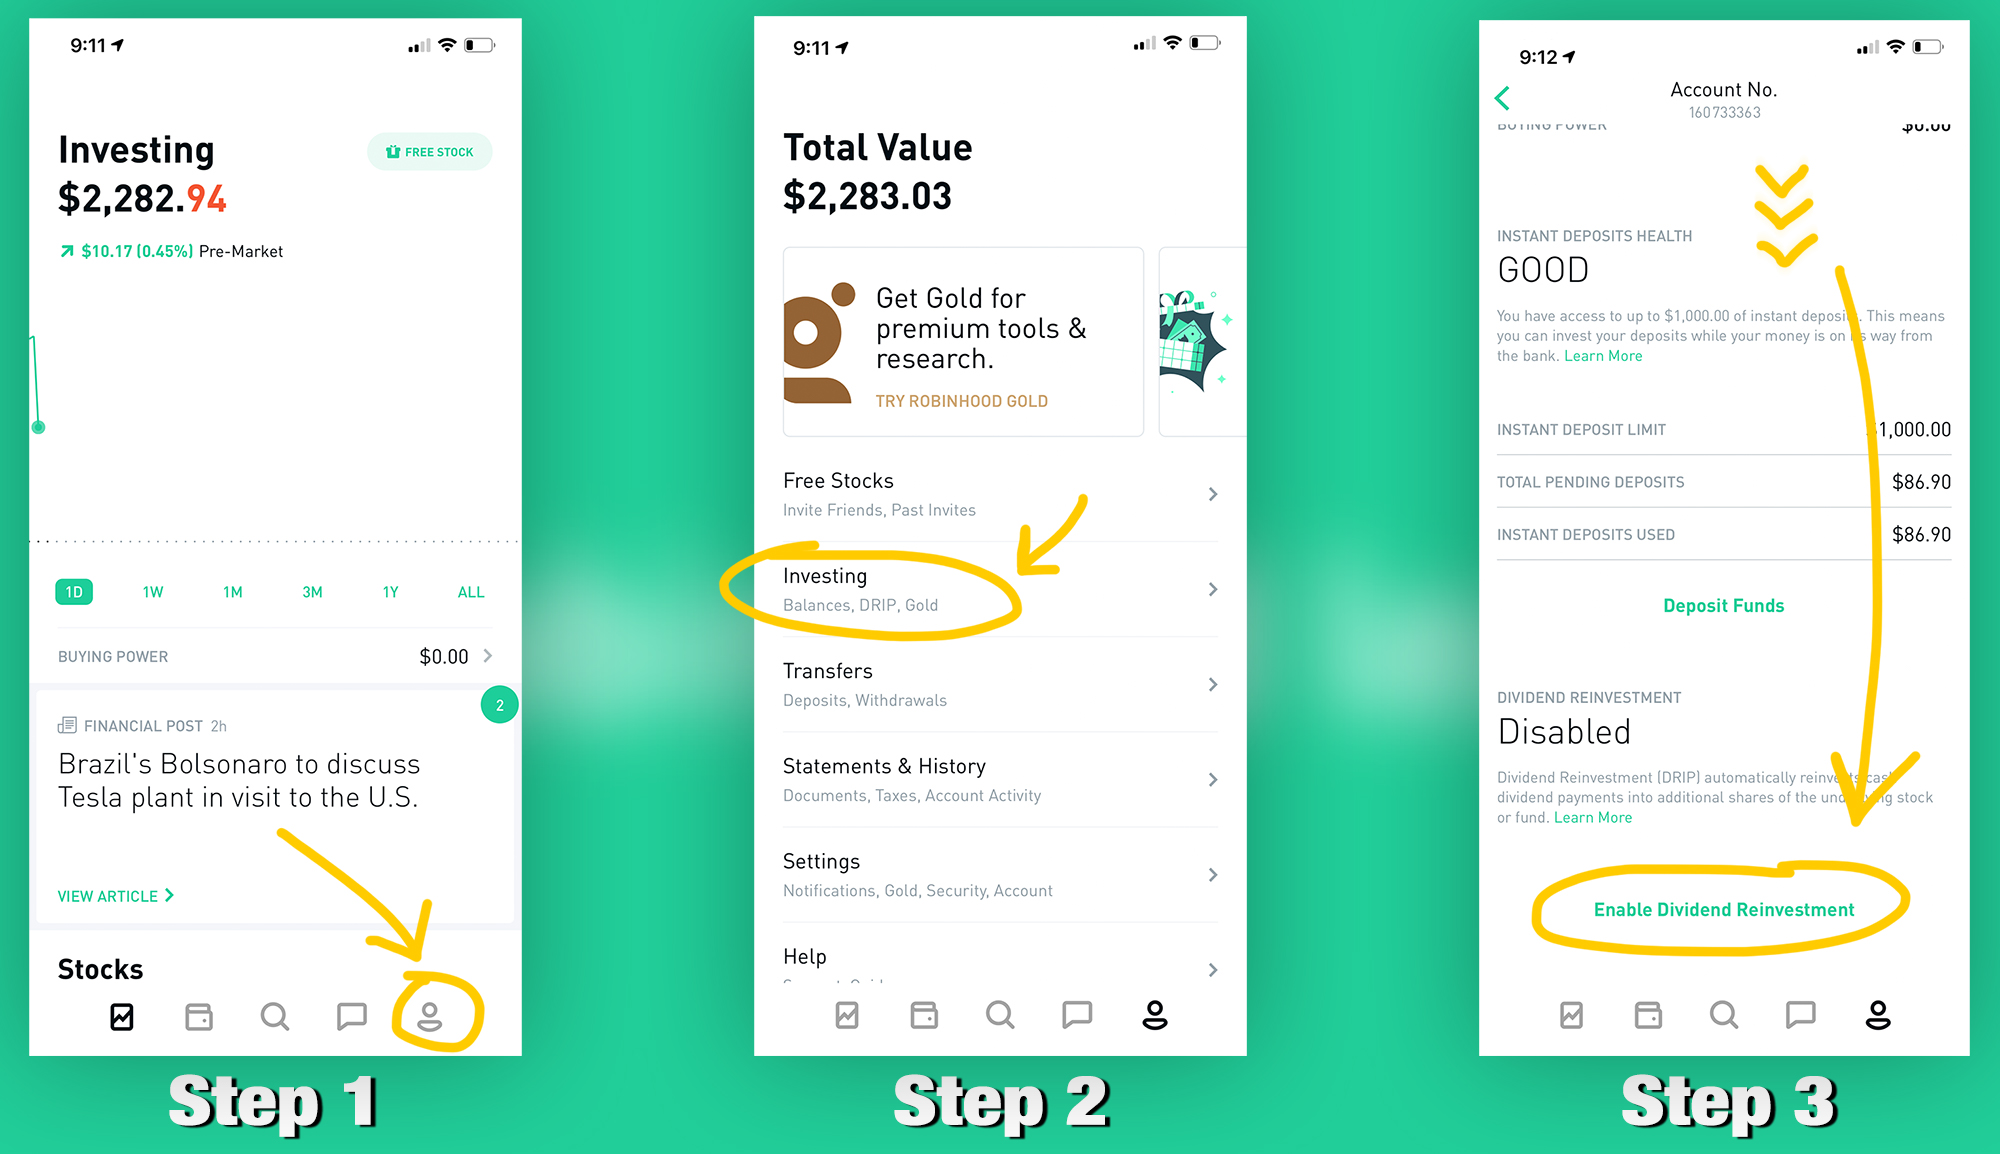 How to enable DRIP (Dividend Reinvestment) on Robinhood